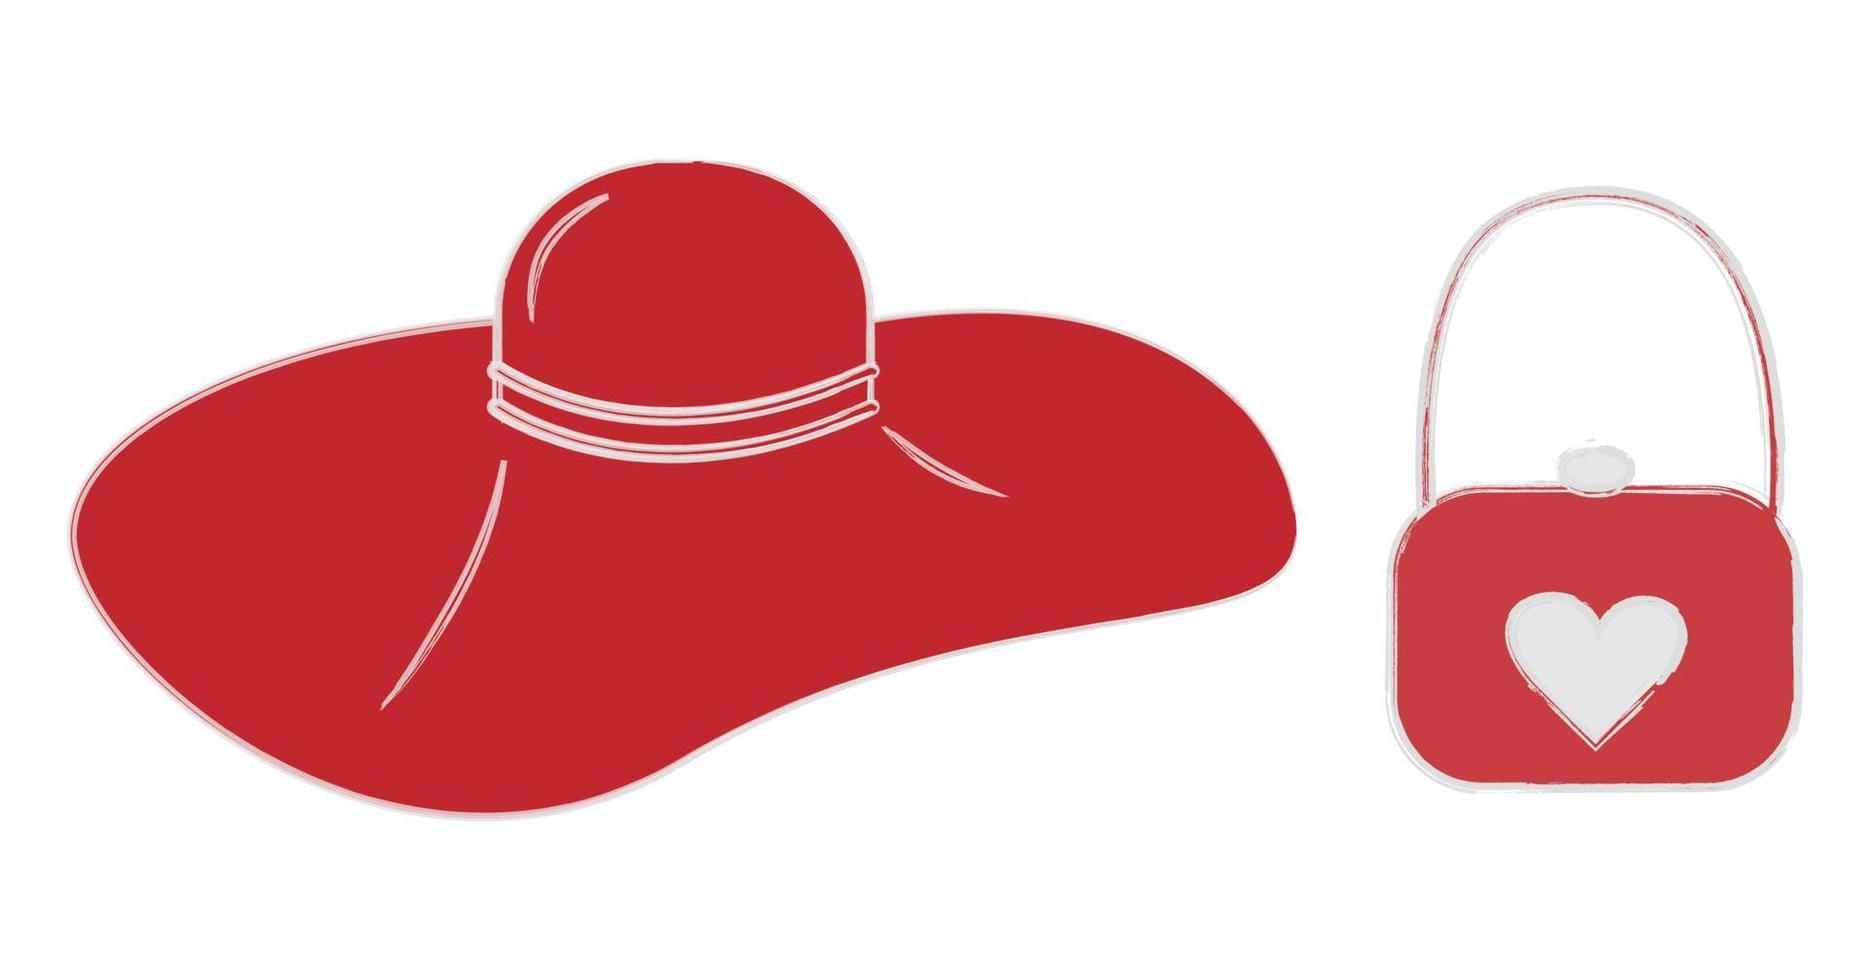 Stylized women Wide-brimmed hat and handbag with painted heart in trendy red hues. Isolate. Sticker vector